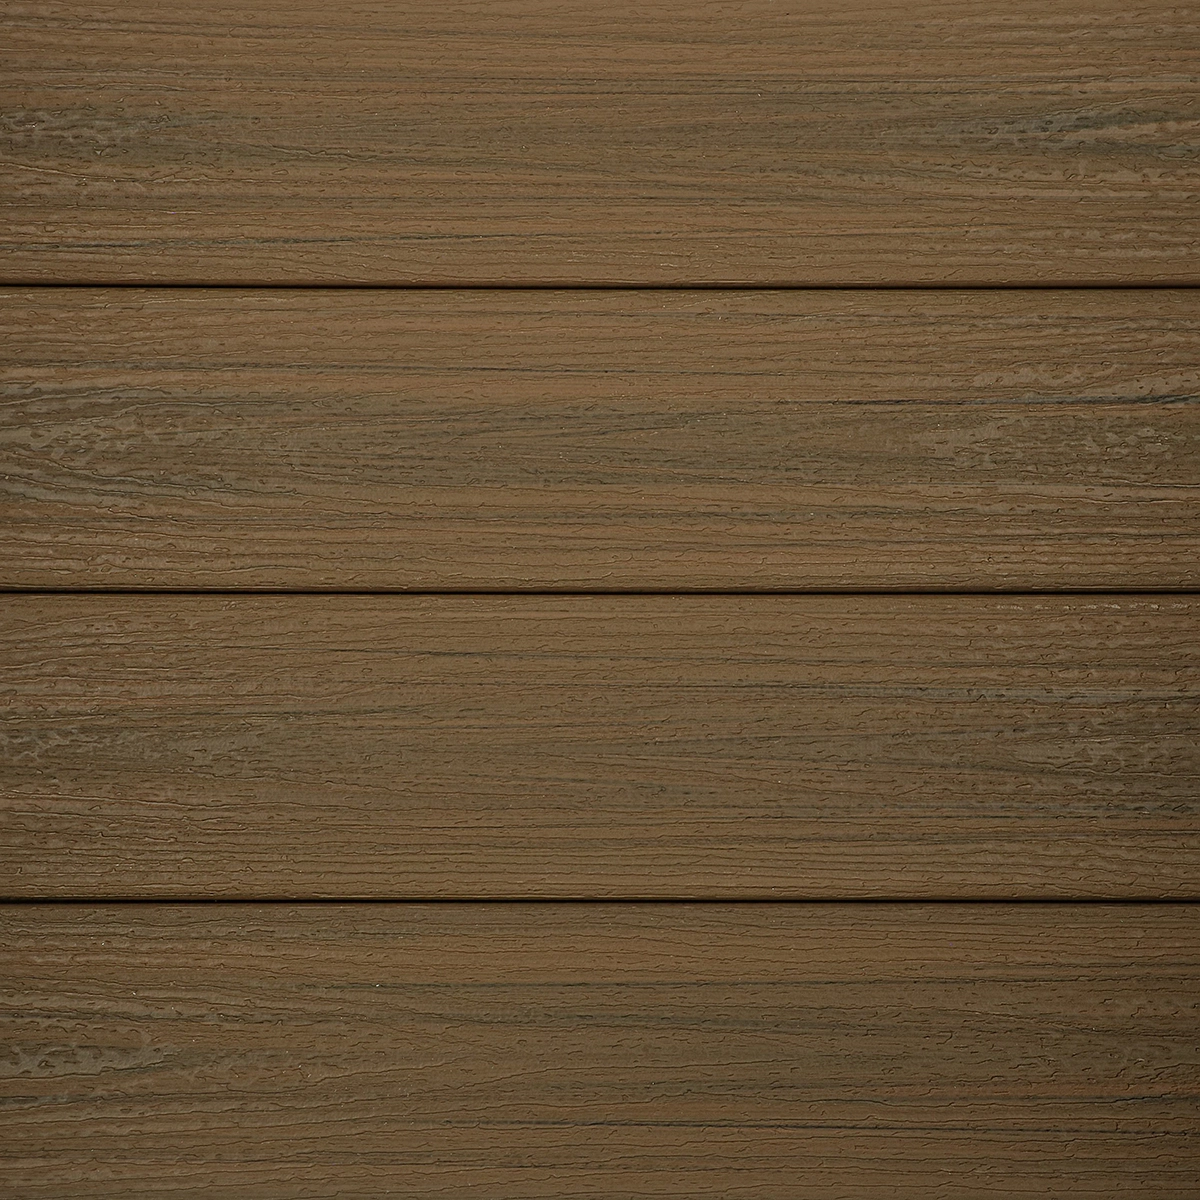 A close-up of the color and texture of Trex Enhance Naturals Toasted Sand decking